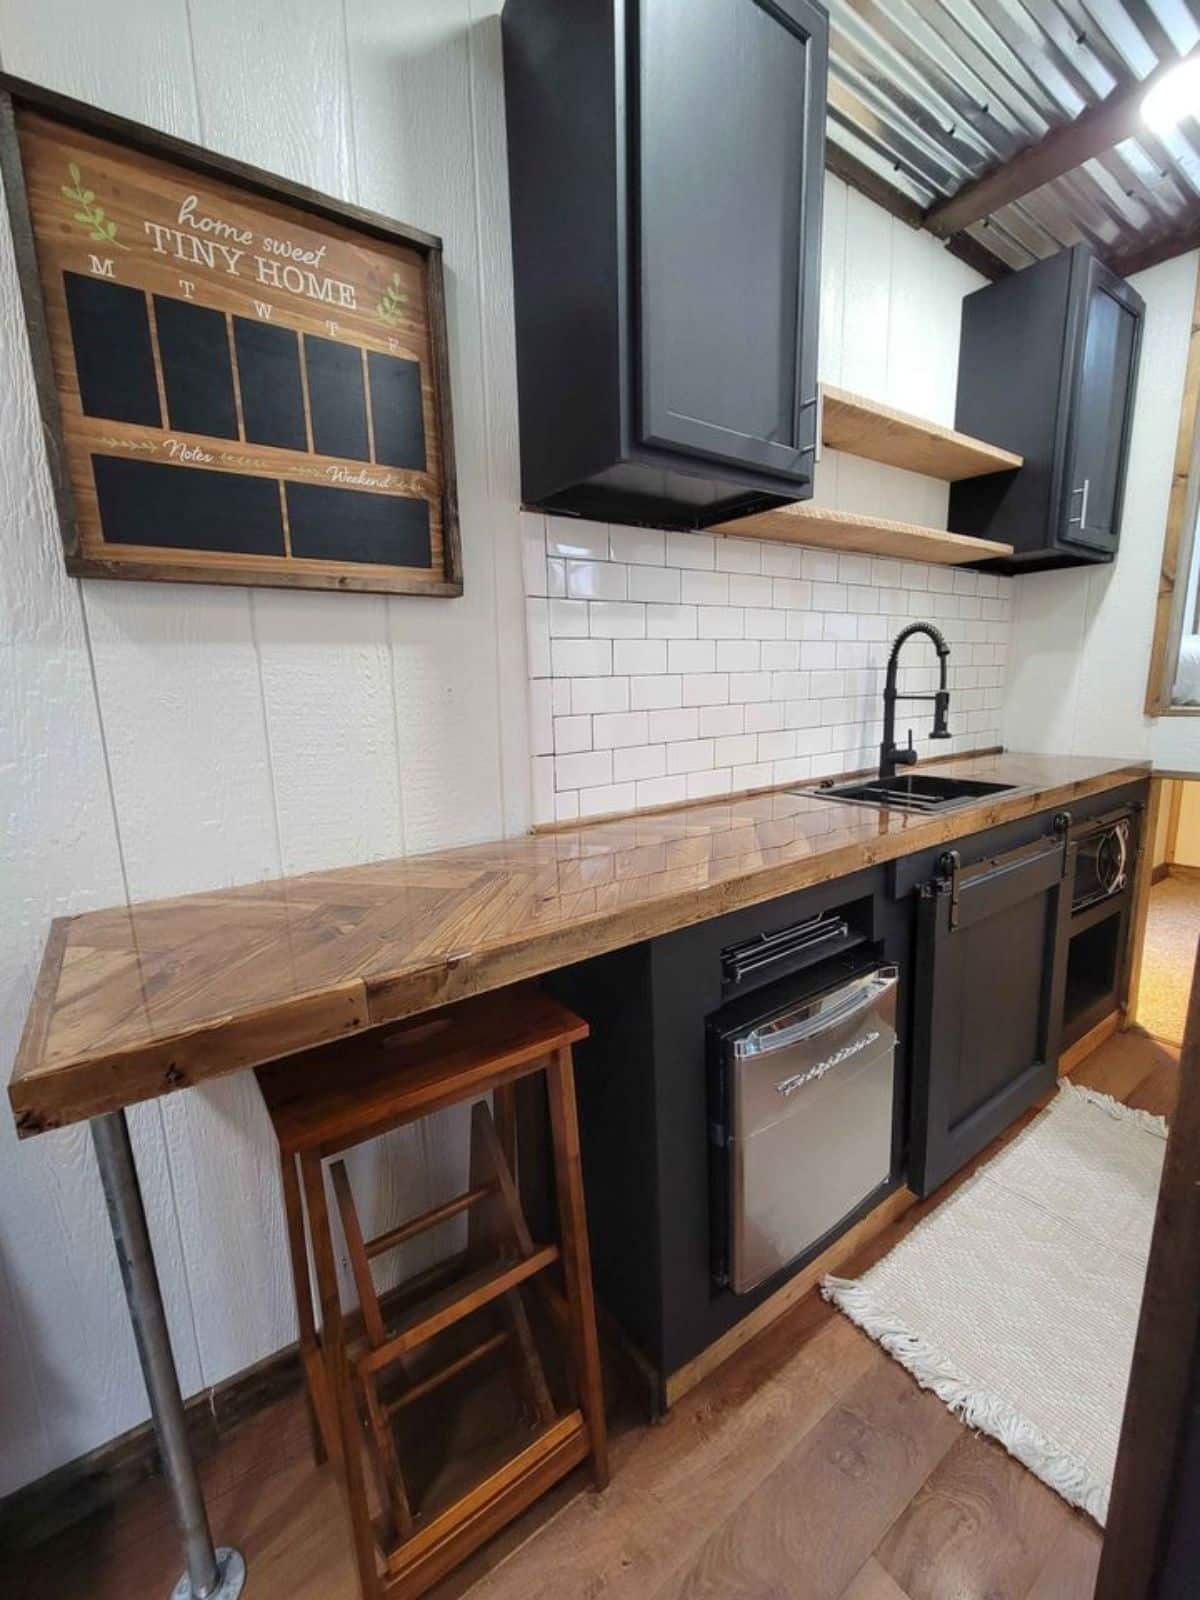 wooden shelves, storage cabinets, essential appliances and long kitchen counter top with an extension being dining table